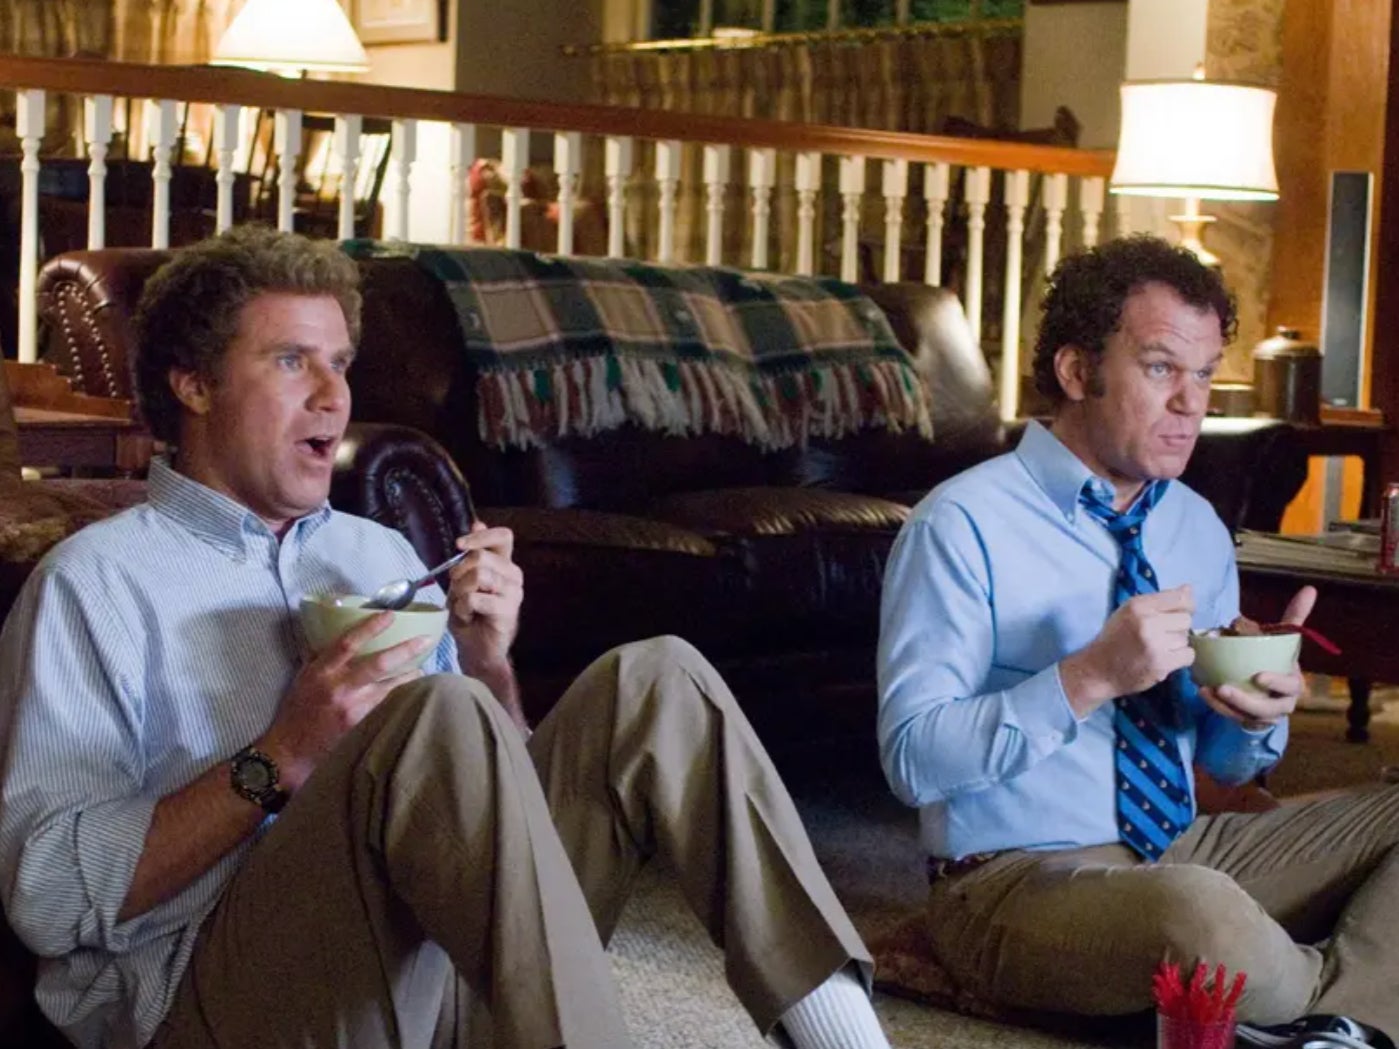 Will Ferrell and John C Reilly in comedy ‘Step Brothers’